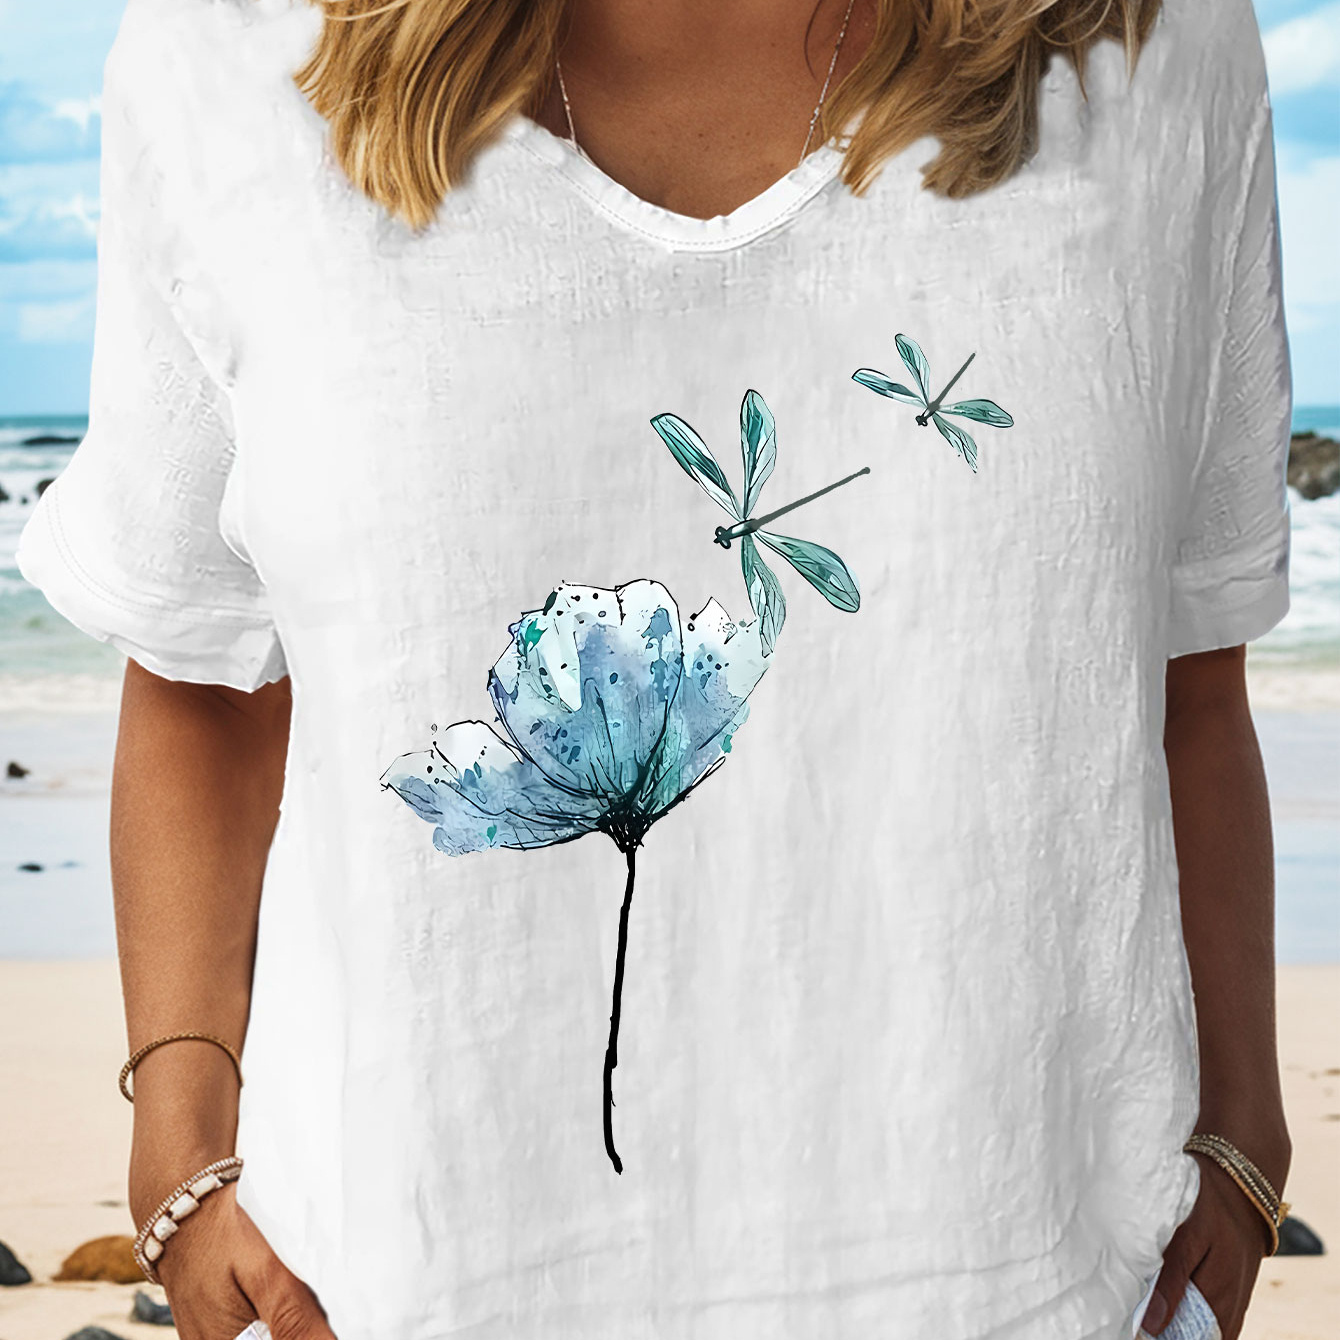 

Floral & Dragonfly Print T-shirt, Short Sleeve V Neck Casual Top For Summer & Spring, Women's Clothing